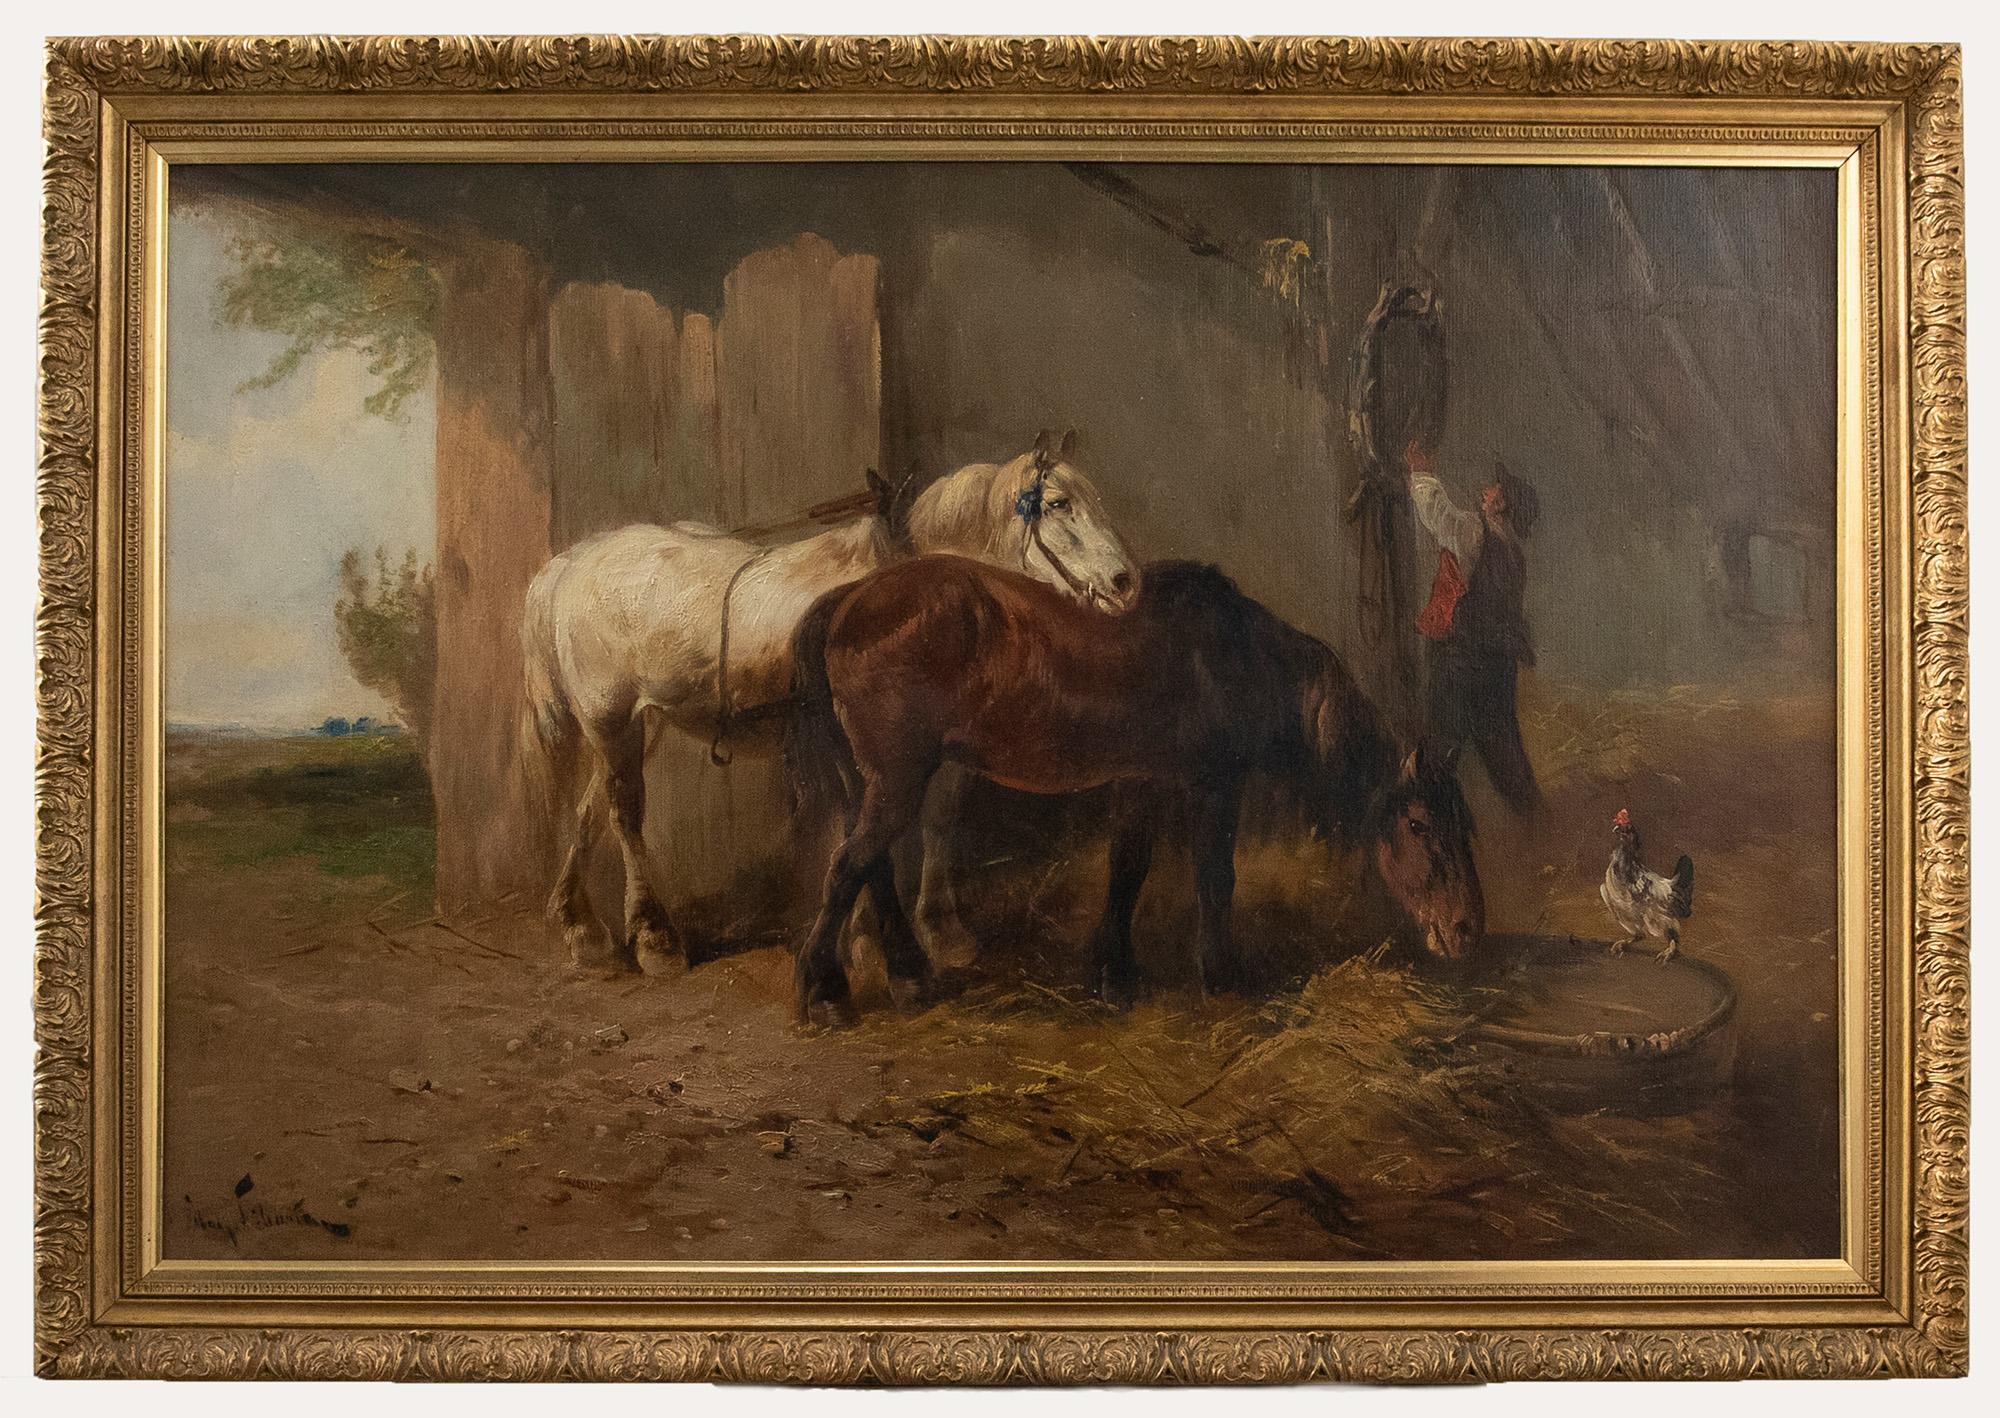 An accomplished oil painting by the Belgium artist Henry Schouten (1864-1927). The scene depicts the returned of two working horses to their straw bedded barn. Schouten has captured each of the animals in fine detail with soft brown eyes and shining